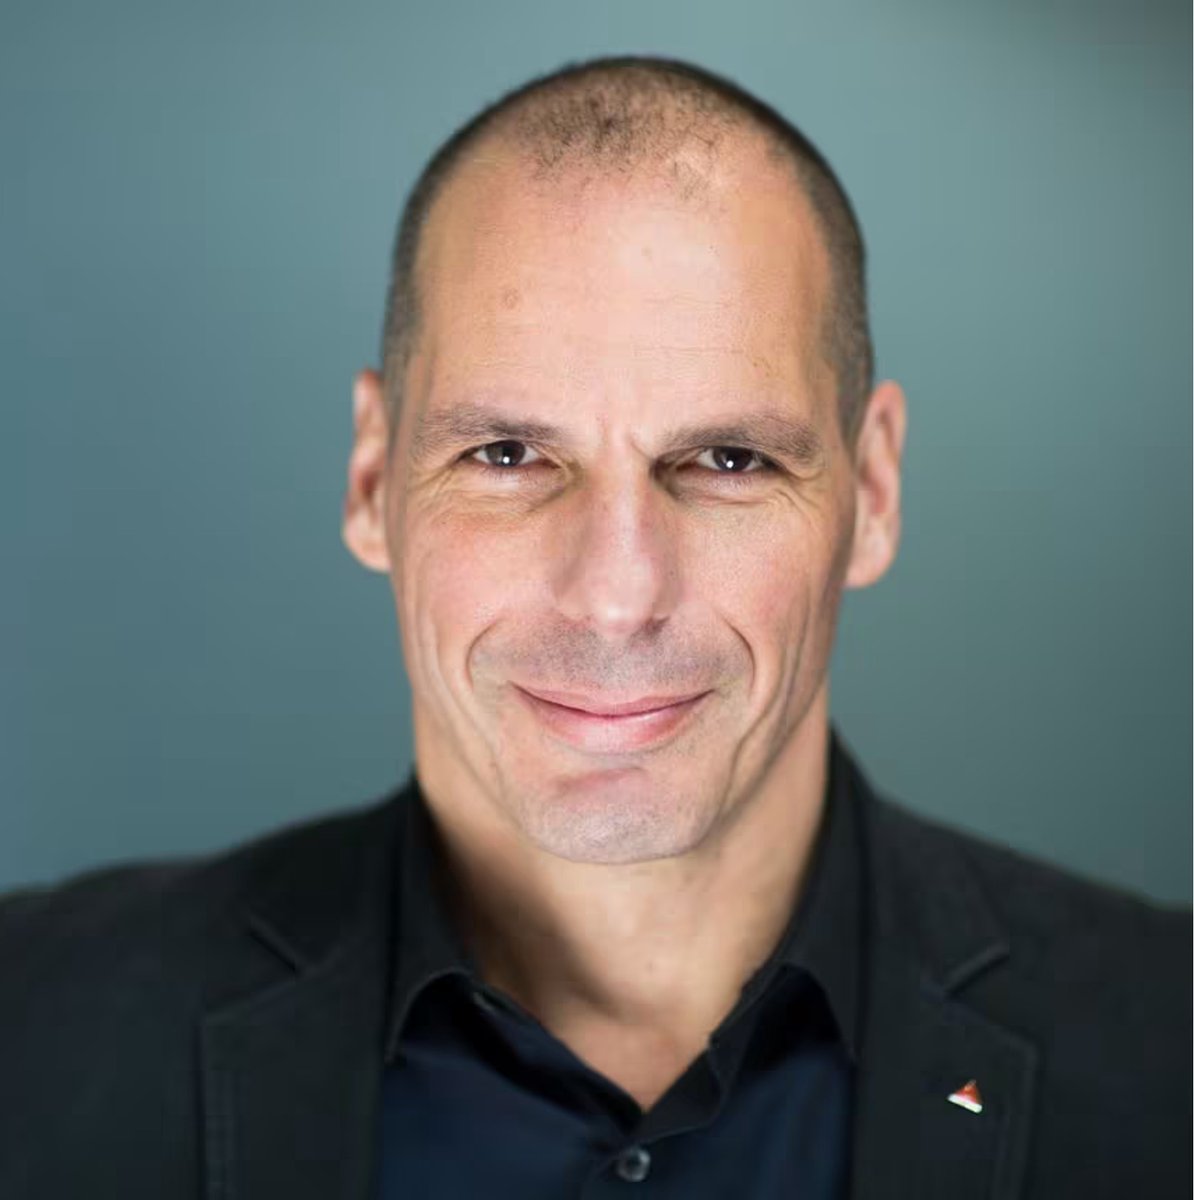 Don't miss world-famous economist and former Greek Finance Minister @yanisvaroufakis who will be joining @AyoCaesar to argue that capitalism is dead and present a game-changing new paradigm: technofeudalism. Tue, 18 June | 7:00pm | London Tickets at howtoacademy.com/events/yanis-v…